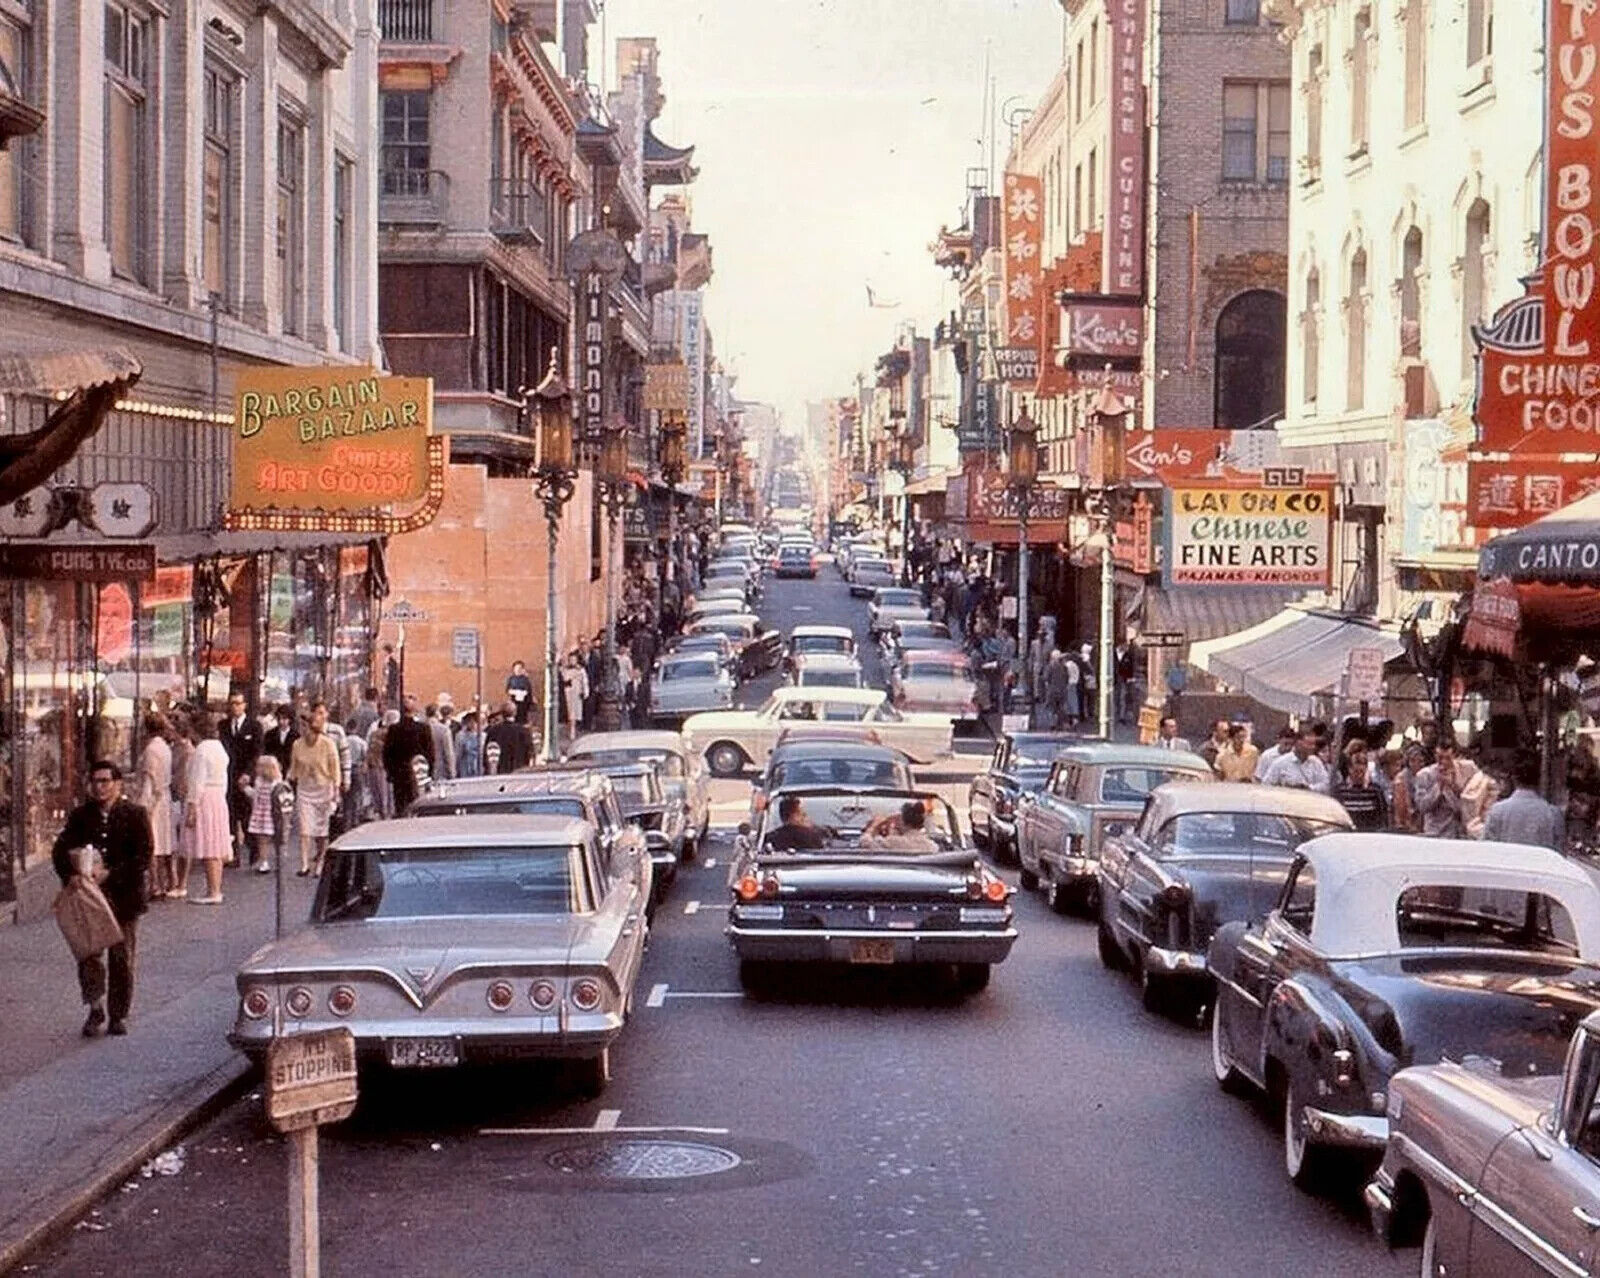 1961 CHINATOWN SAN FRANCISCO City Street with Classic Cars Picture Photo 4x6